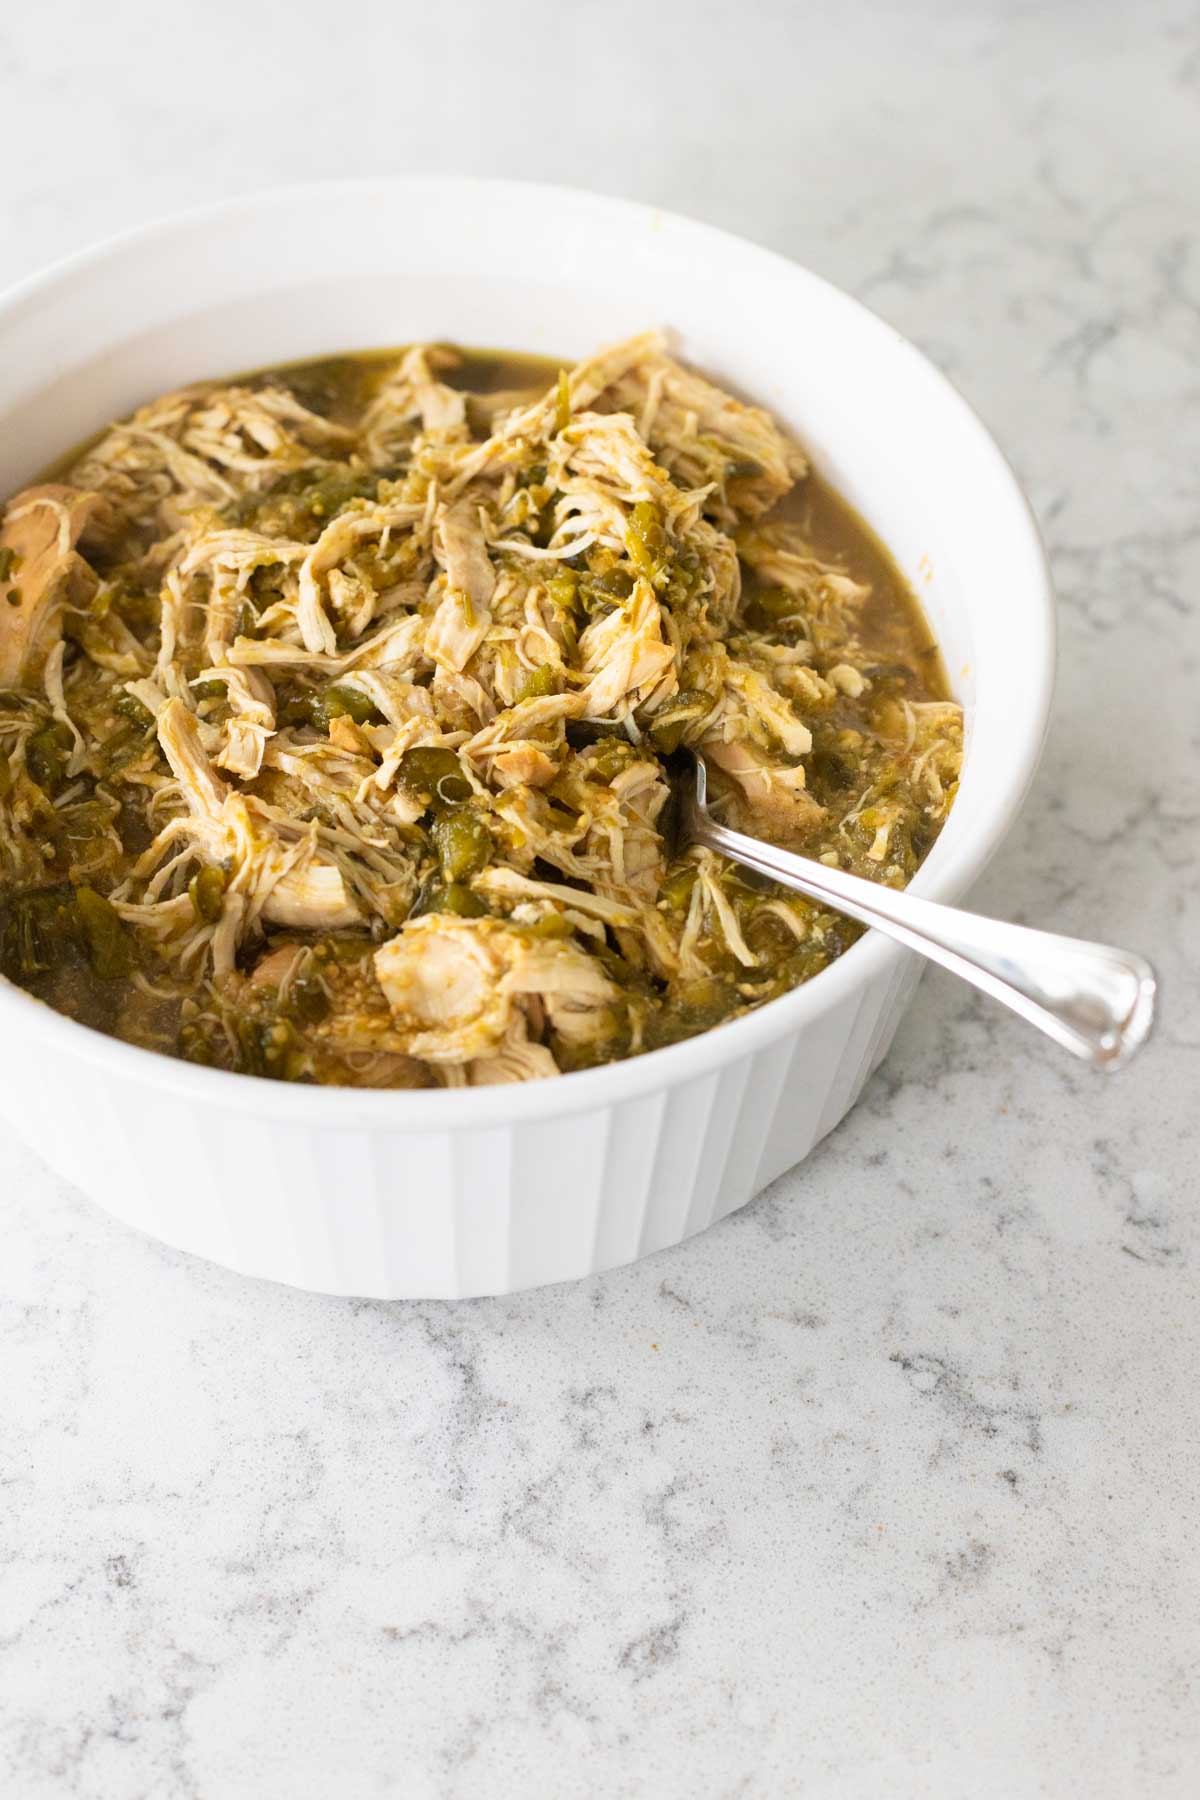 The shredded chicken is in a serving bowl ready for the table.